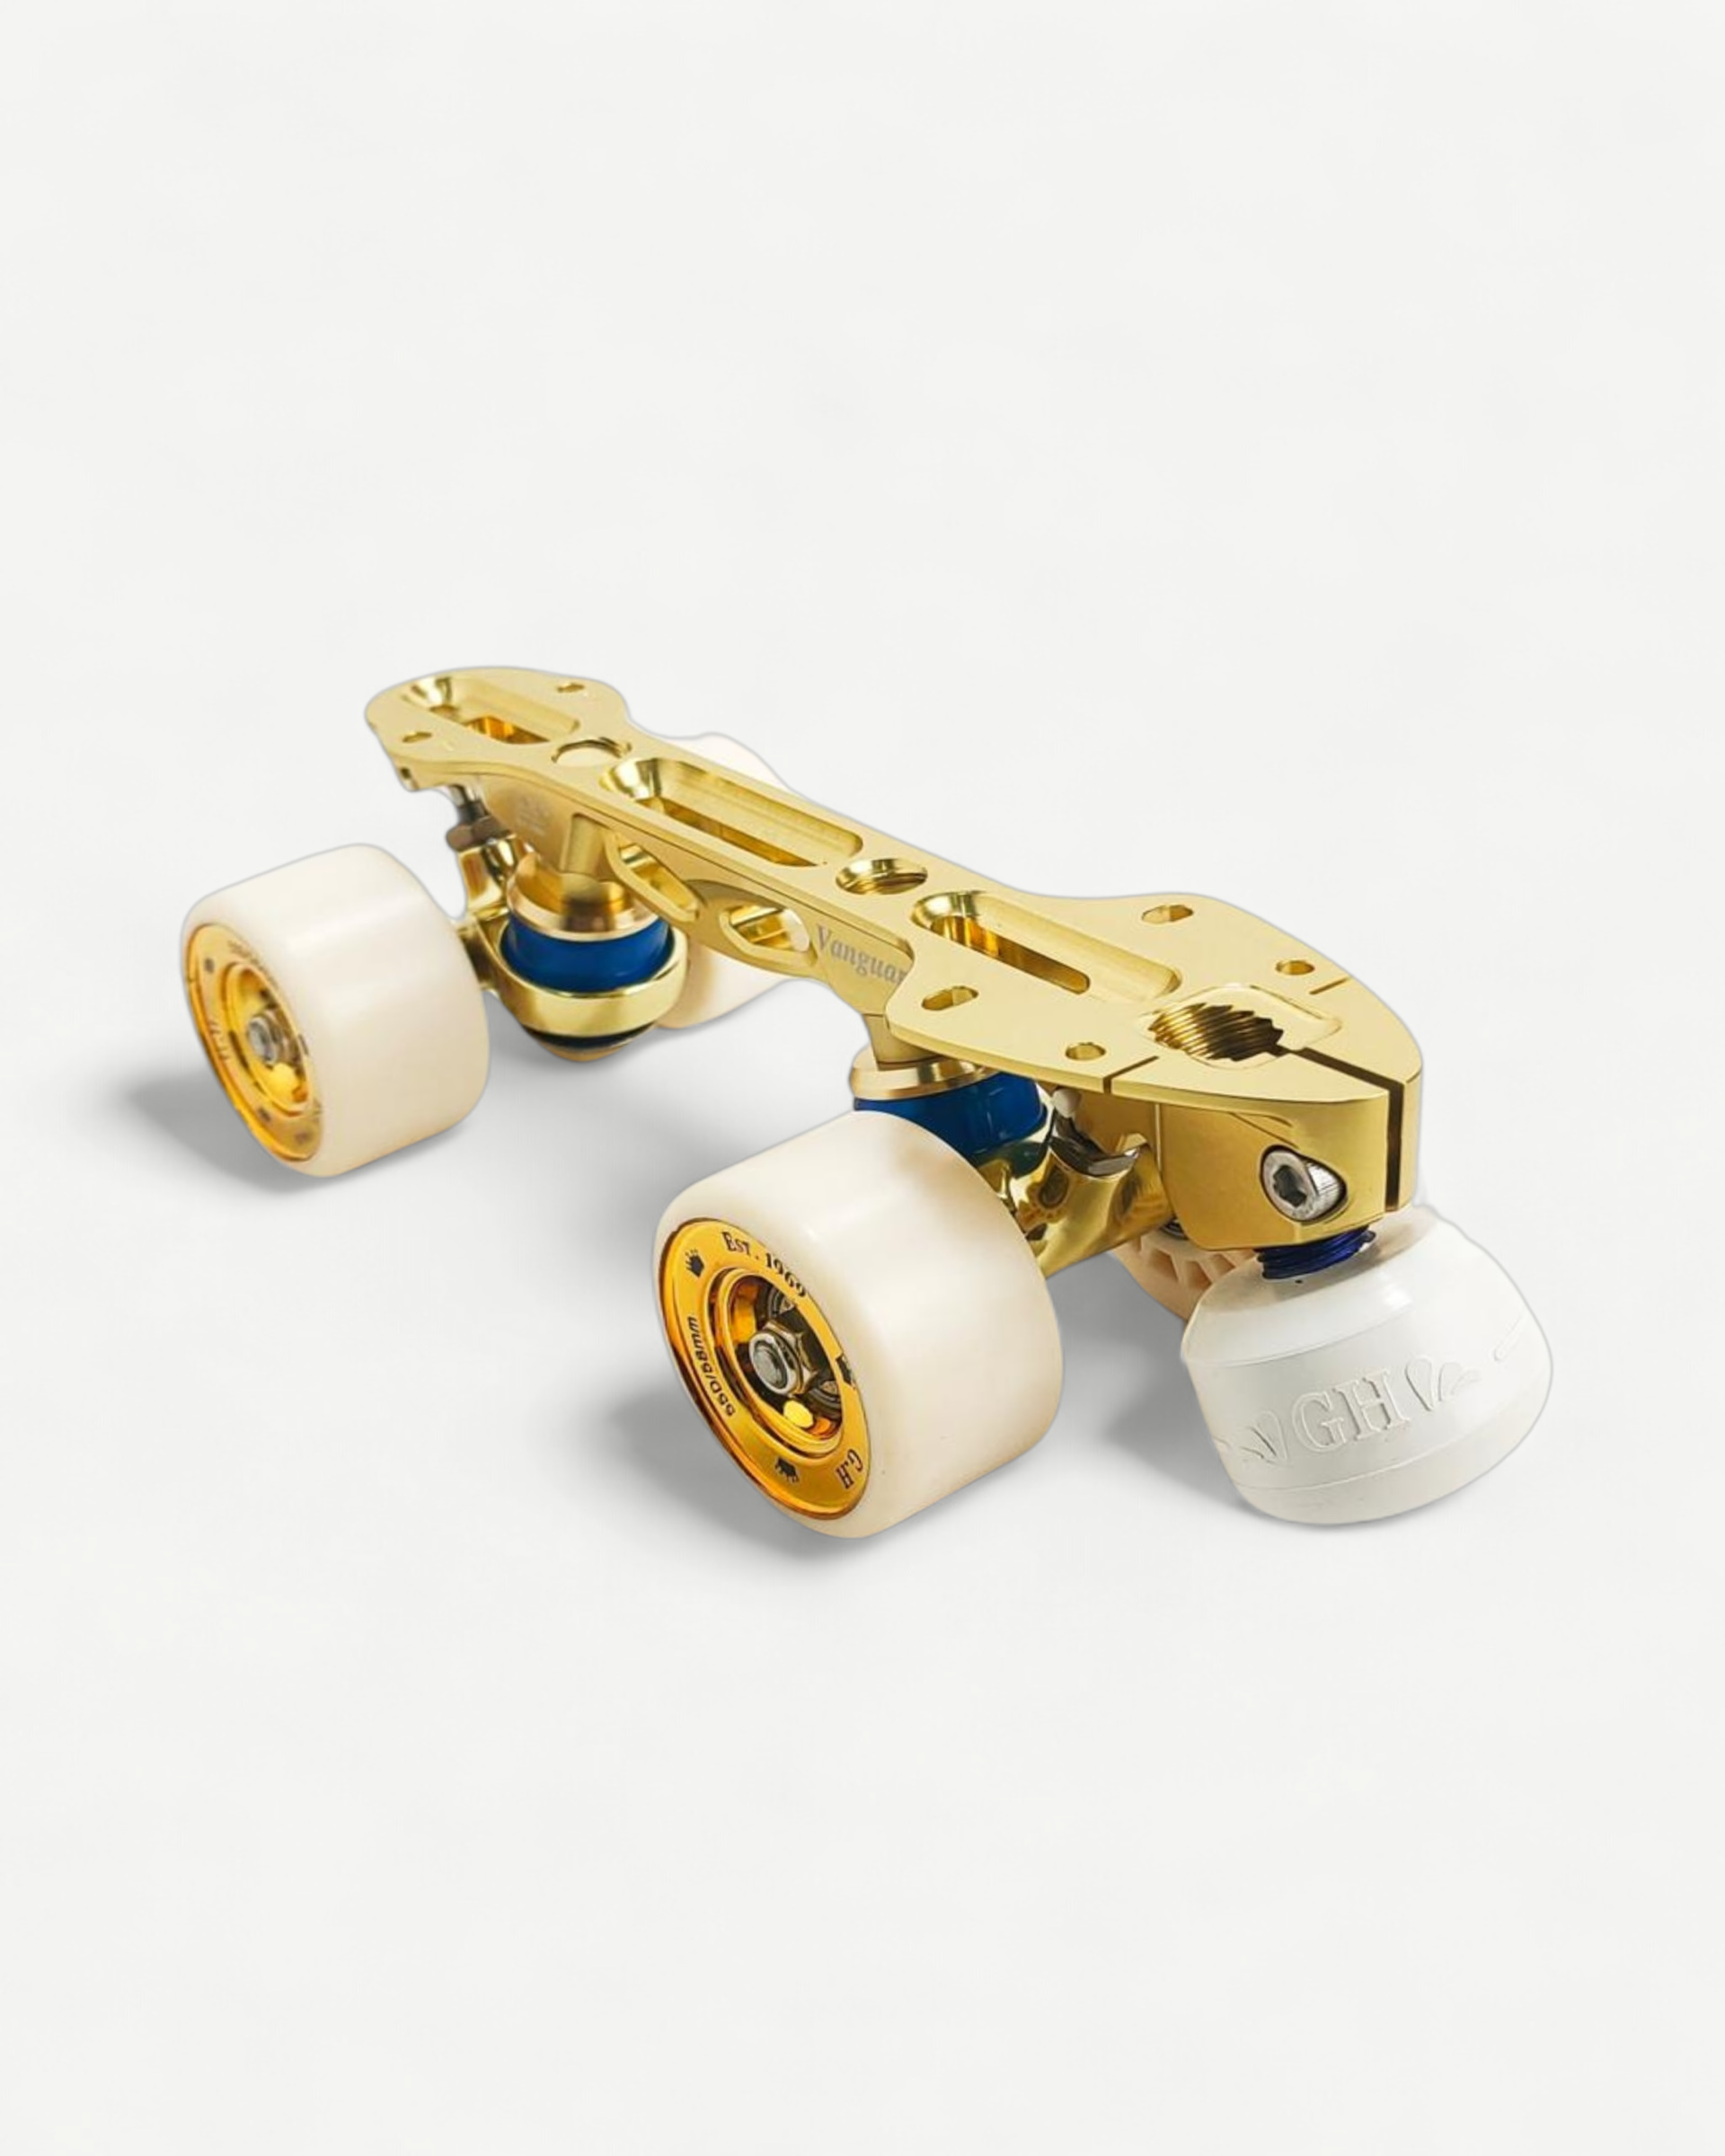 Vanguard super light quad frames— with bearings and wheels